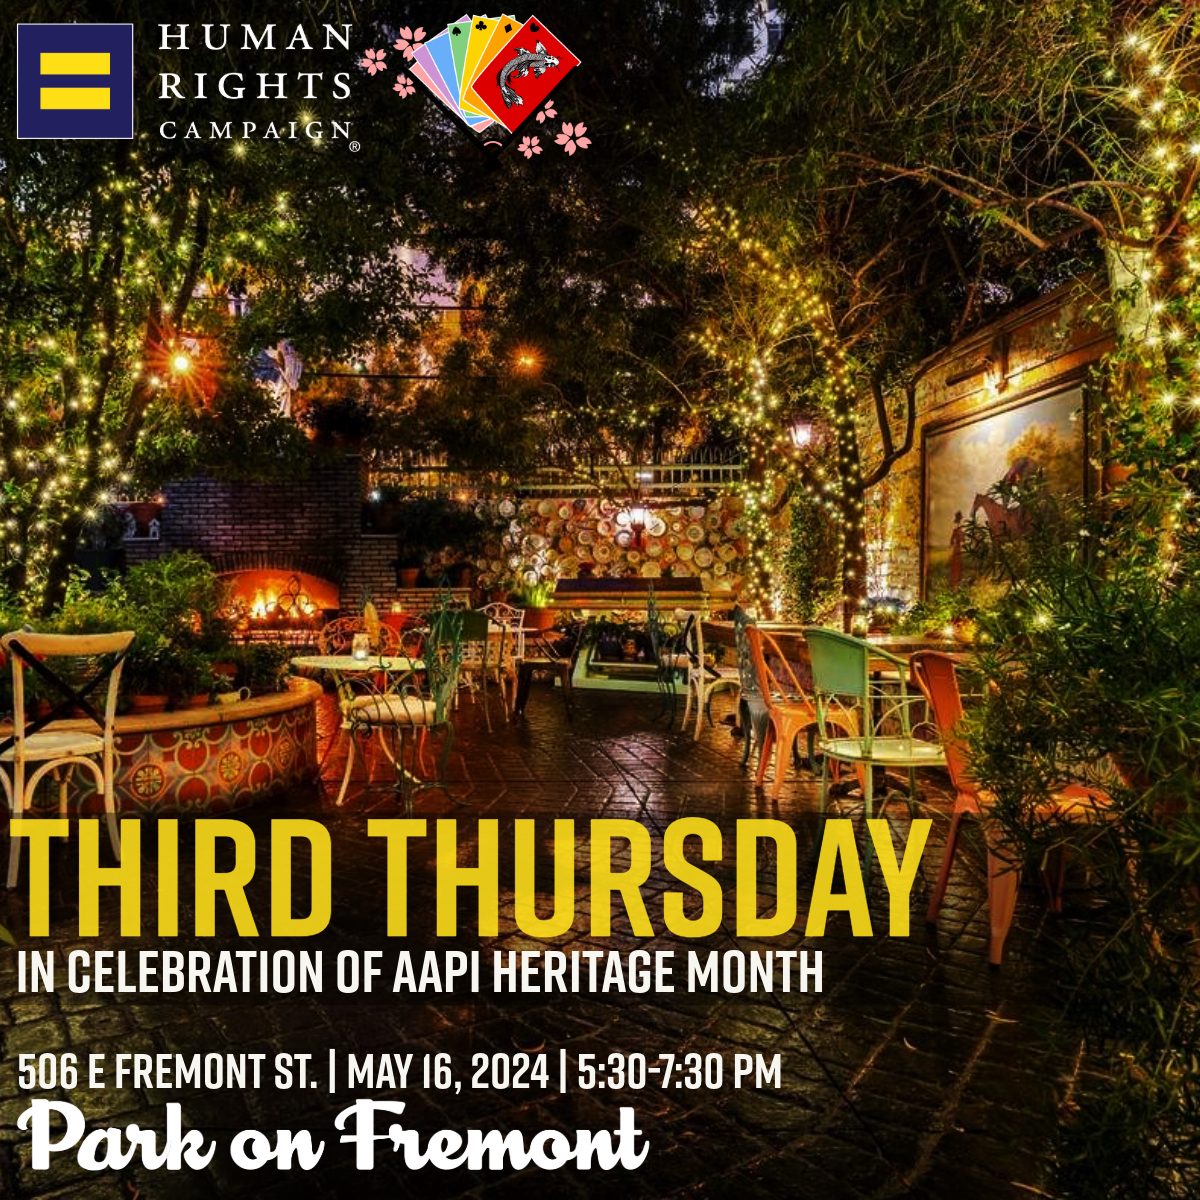 We are excited to partner with @SNAPIQS & present this month's Third Thursday in celebration of #AAPI Heritage Month. Thu May 16, 5:30PM Park on Fremont 506 E. Fremont St. Get a complimentary welcome drink when you sign up at parkonfremont.com/hrc #LGBTQIA #Pride